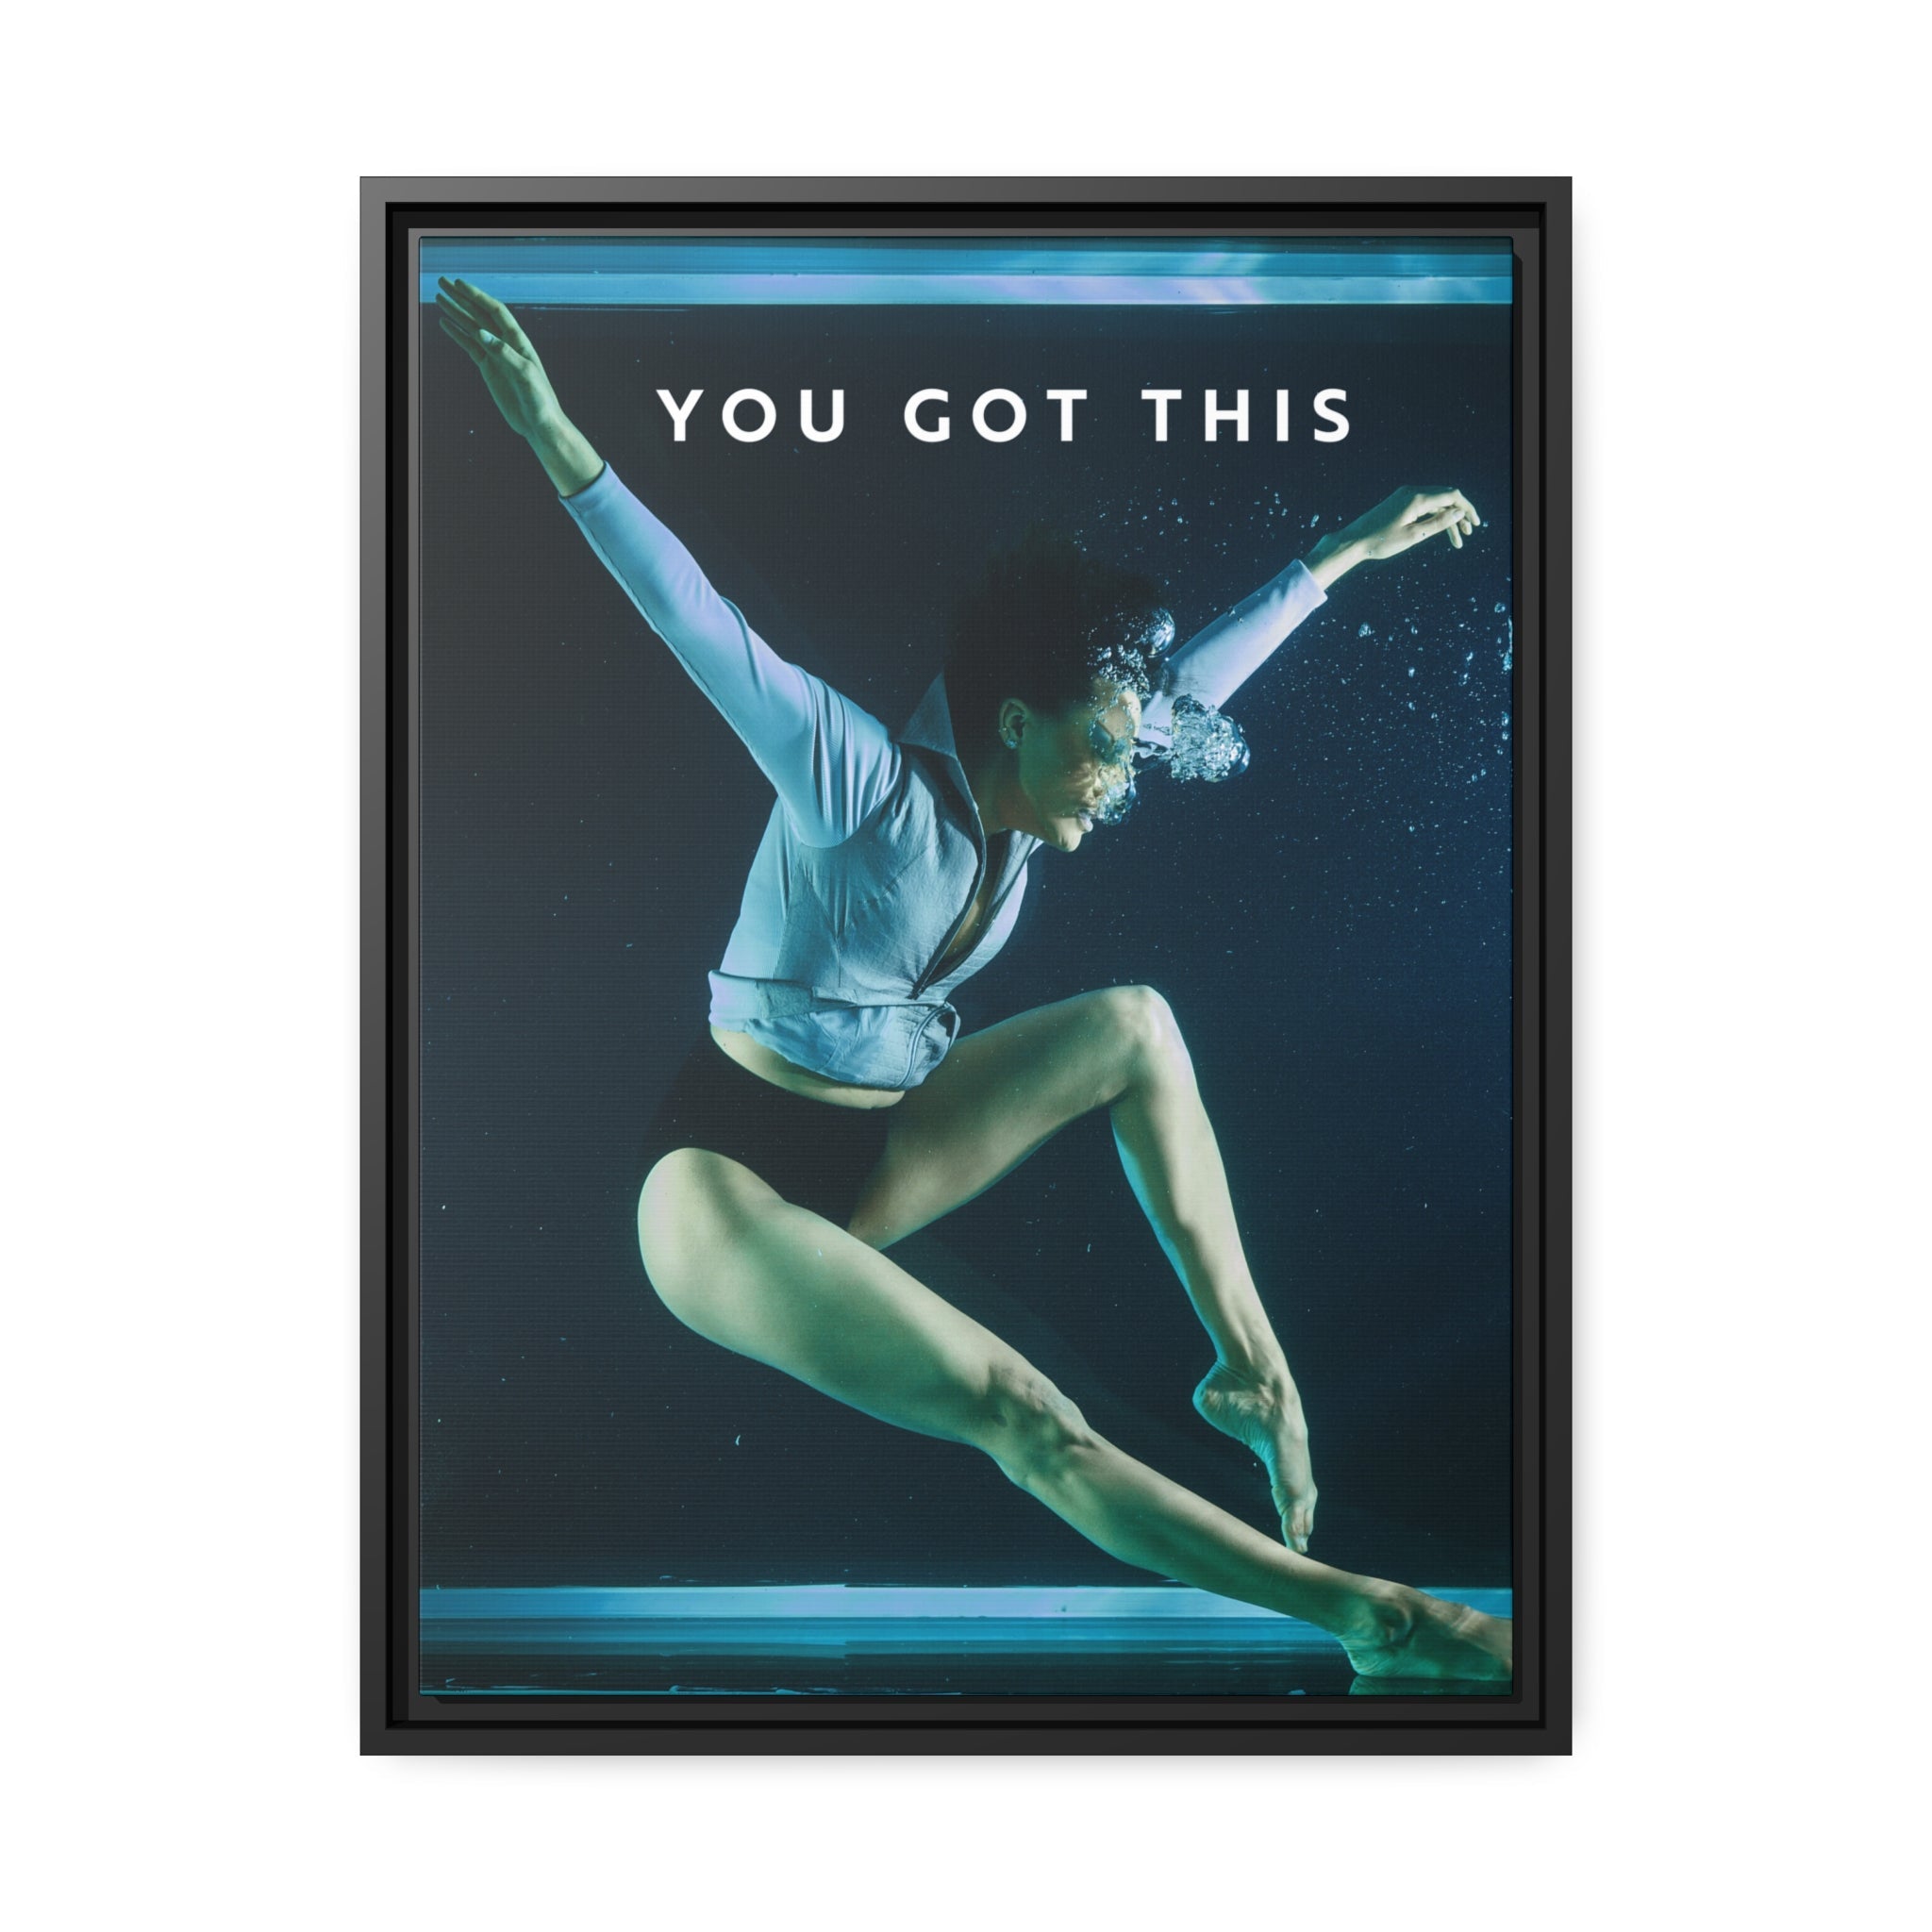 You Got This - Grace Under Pressure - Wall Art additional image 3